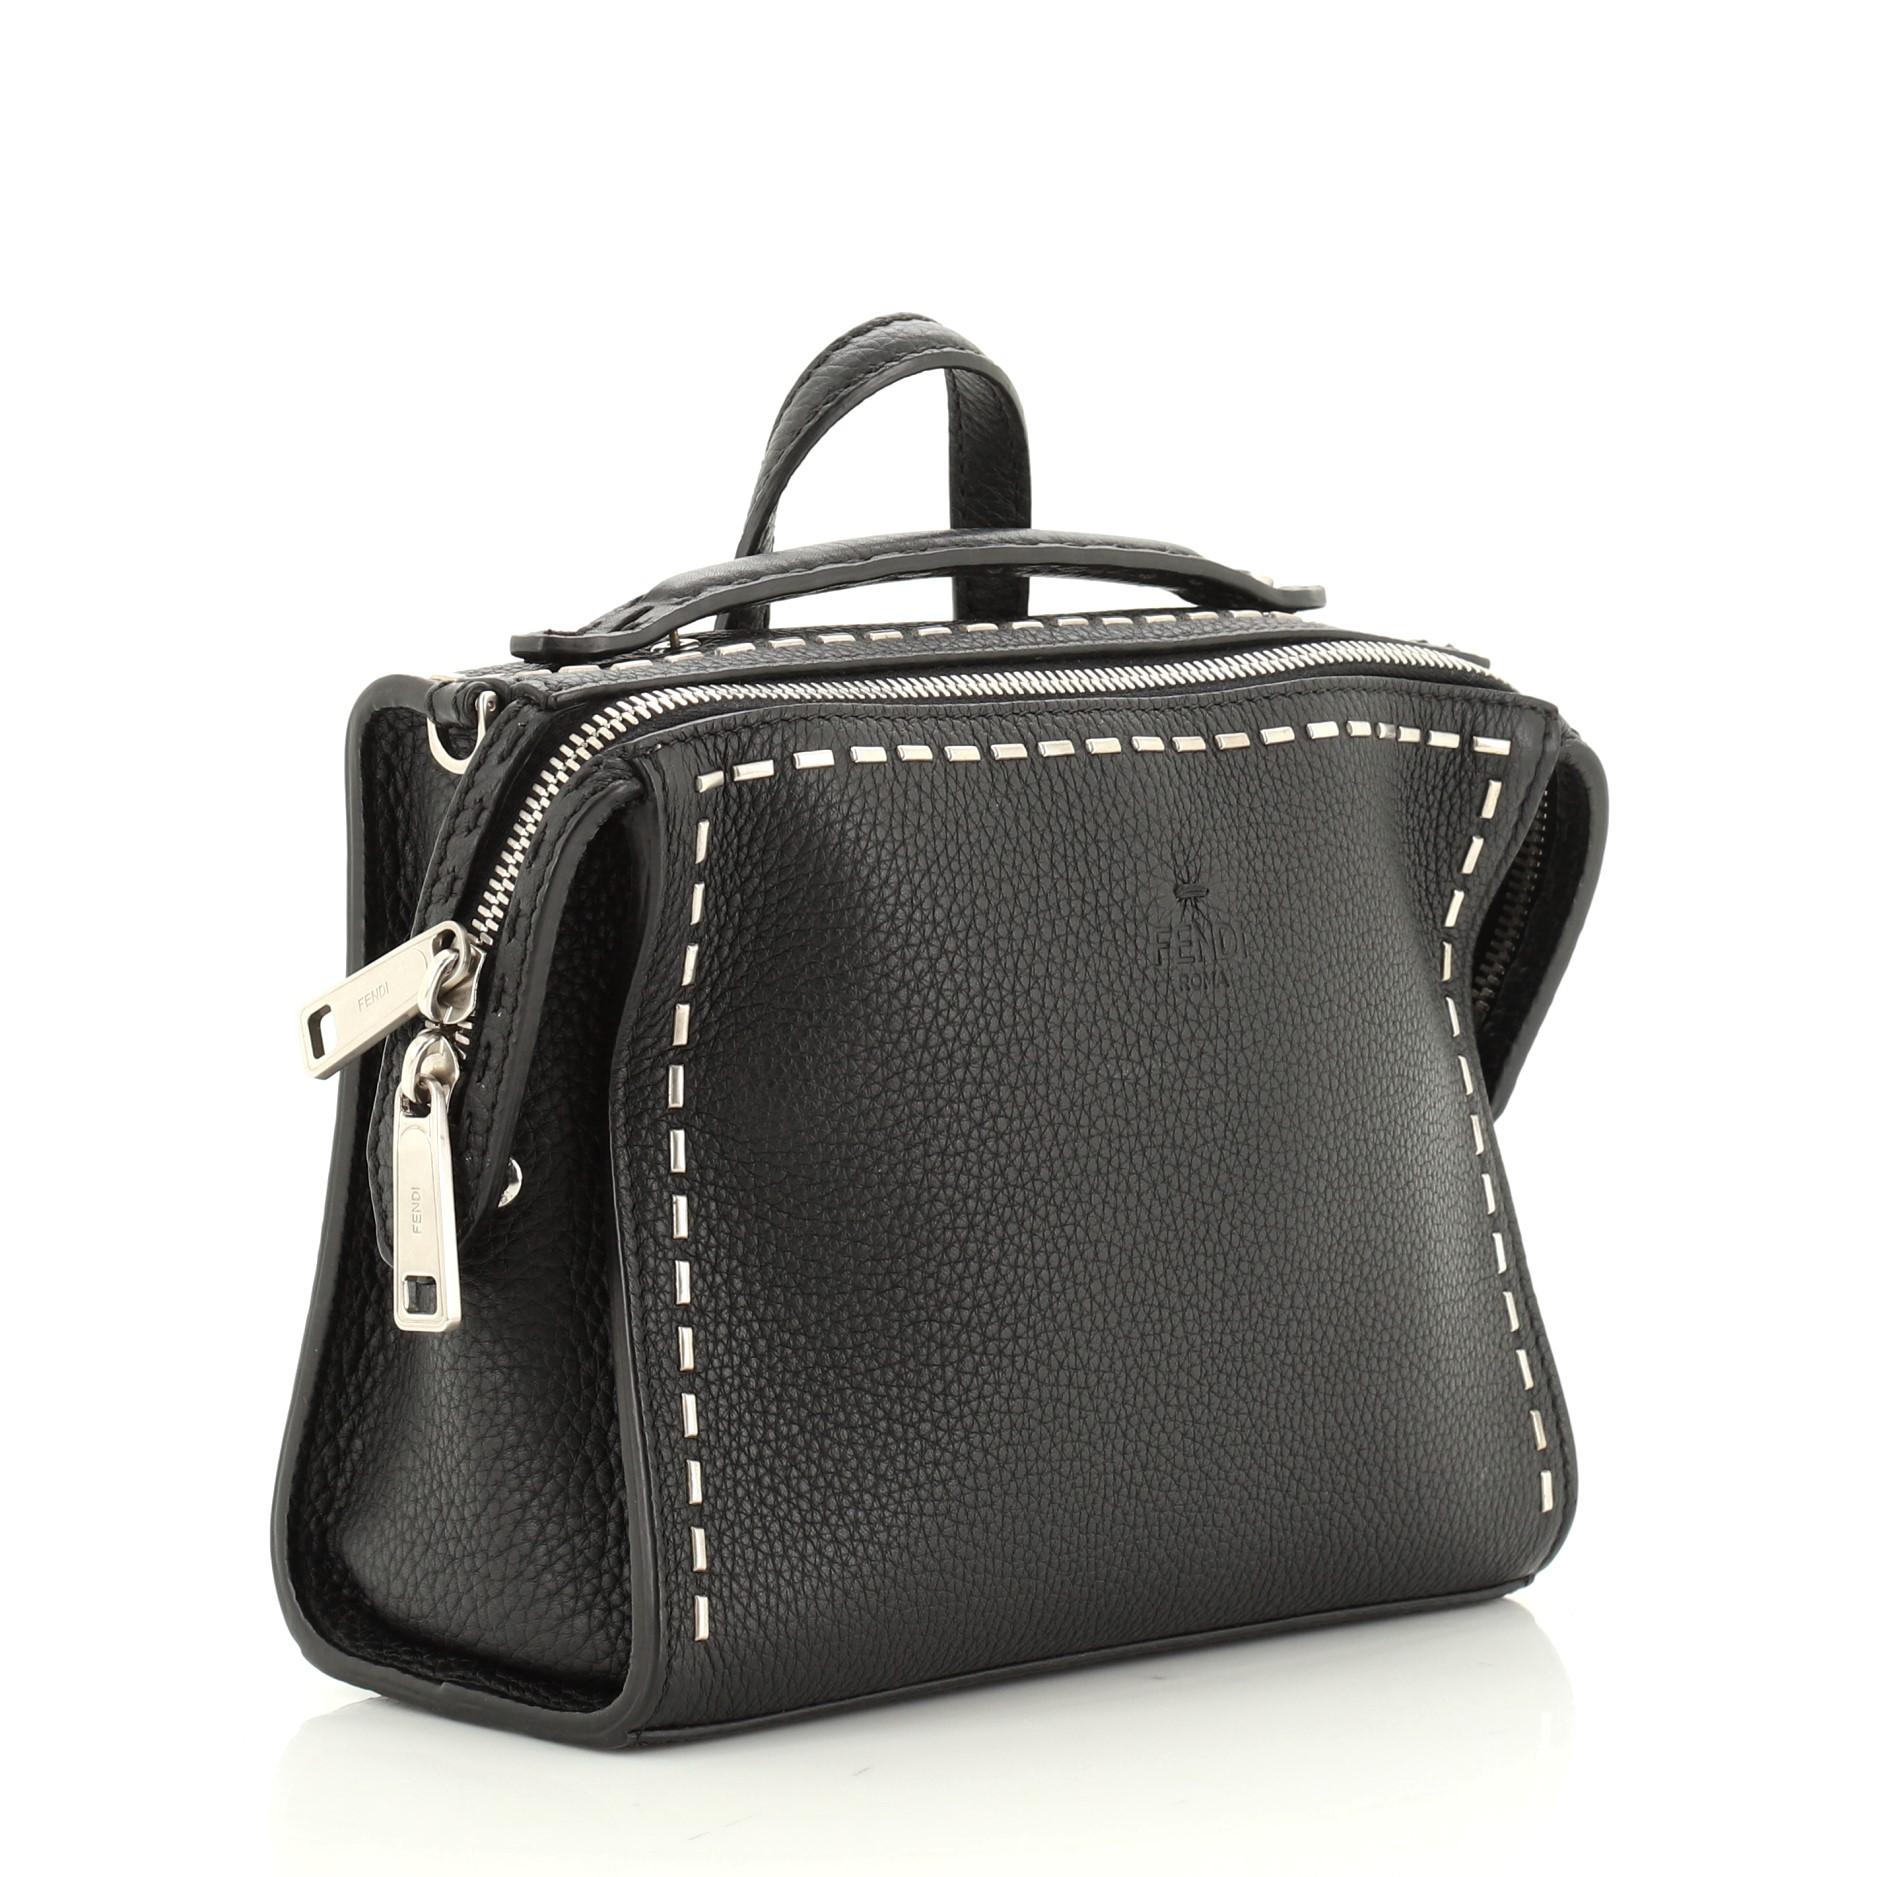 This Fendi Selleria Messenger Bag Studded Leather Mini, crafted in black leather, features a leather top handle, and matte silver-tone hardware. Its zip closure opens to a black fabric interior. 

Estimated Retail Price: $2,100
Condition: Damaged.